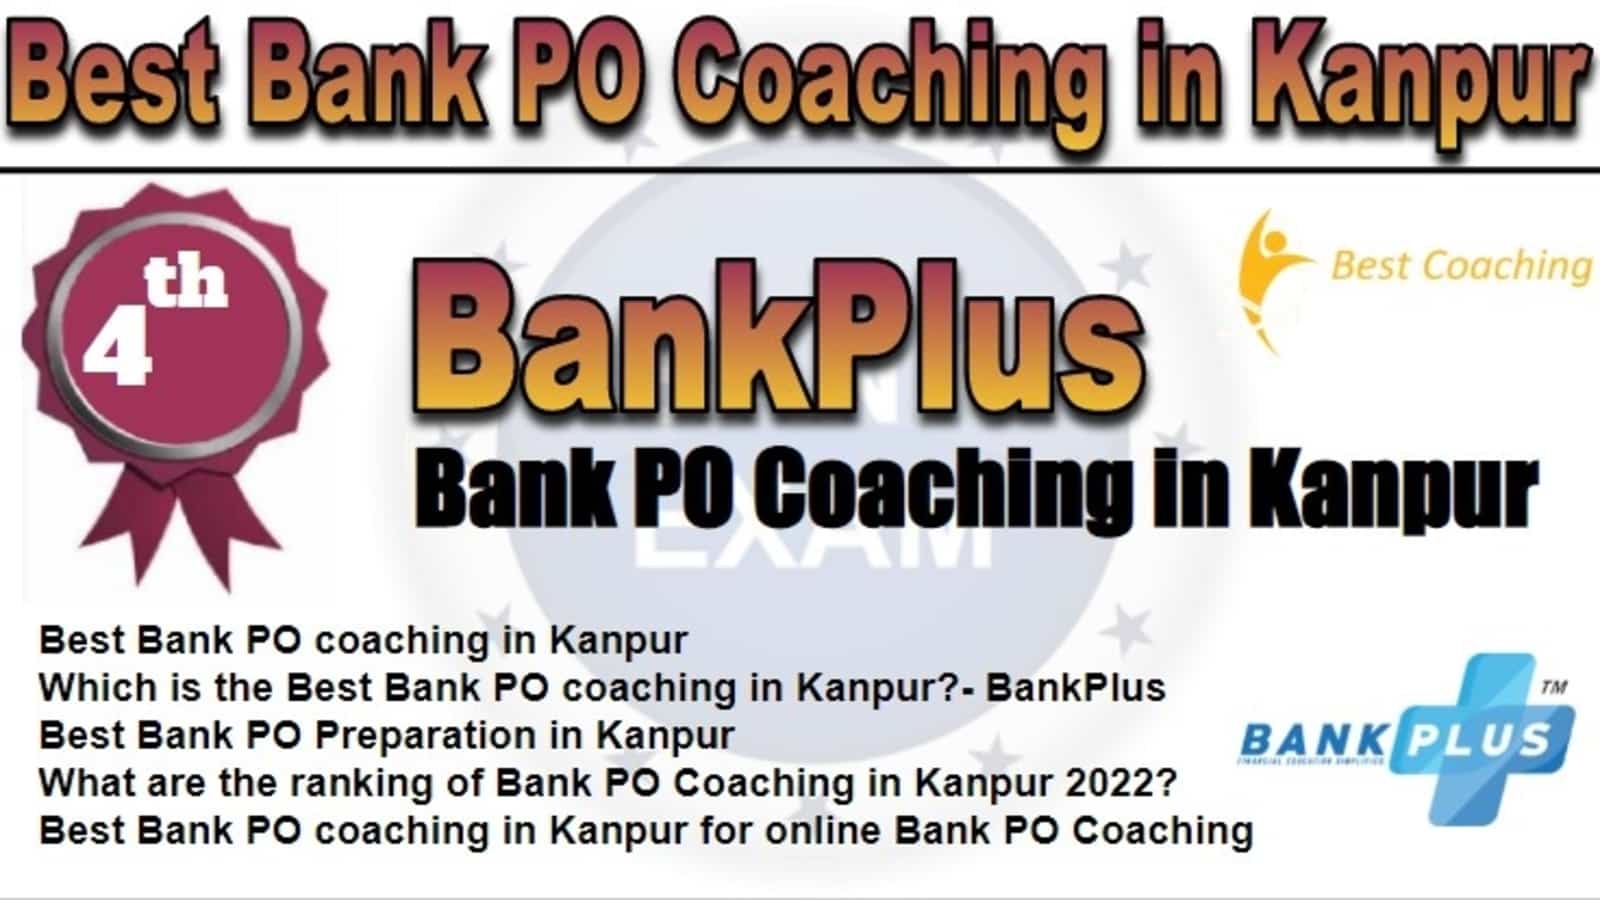 Rank 4 Best Bank PO Coaching in Kanpur